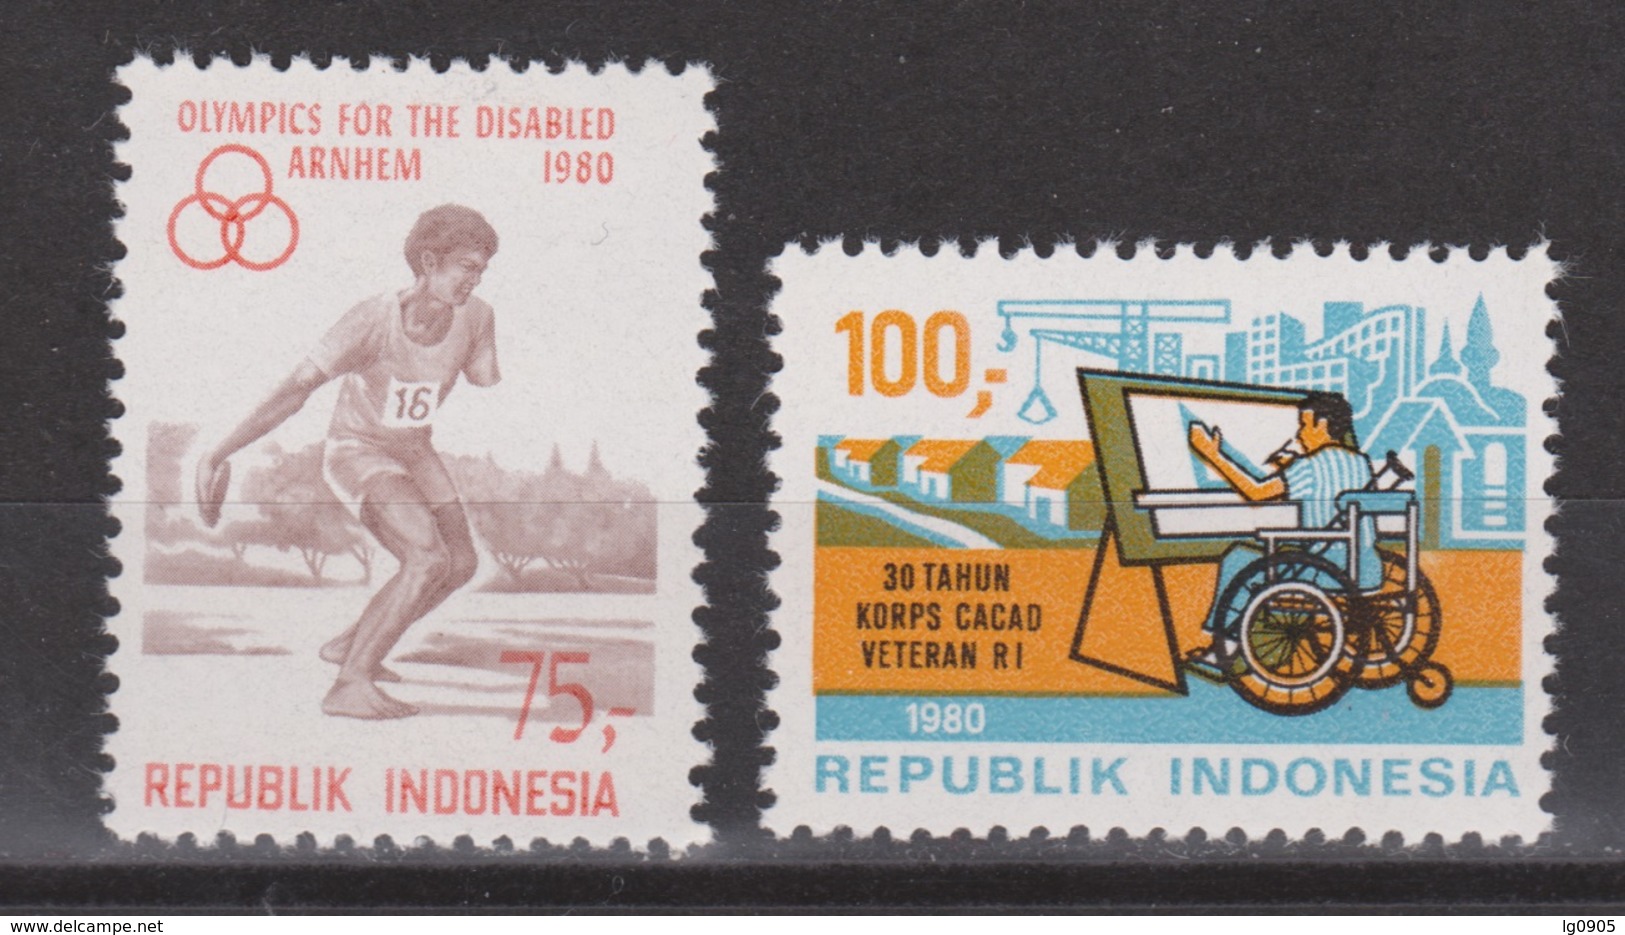 Indonesie 1003-1004 MNH ; Olympic Games Handicapped Persons Arnhem 1980 NOW MANY STAMPS INDONESIA VERY CHEAP - Handisport